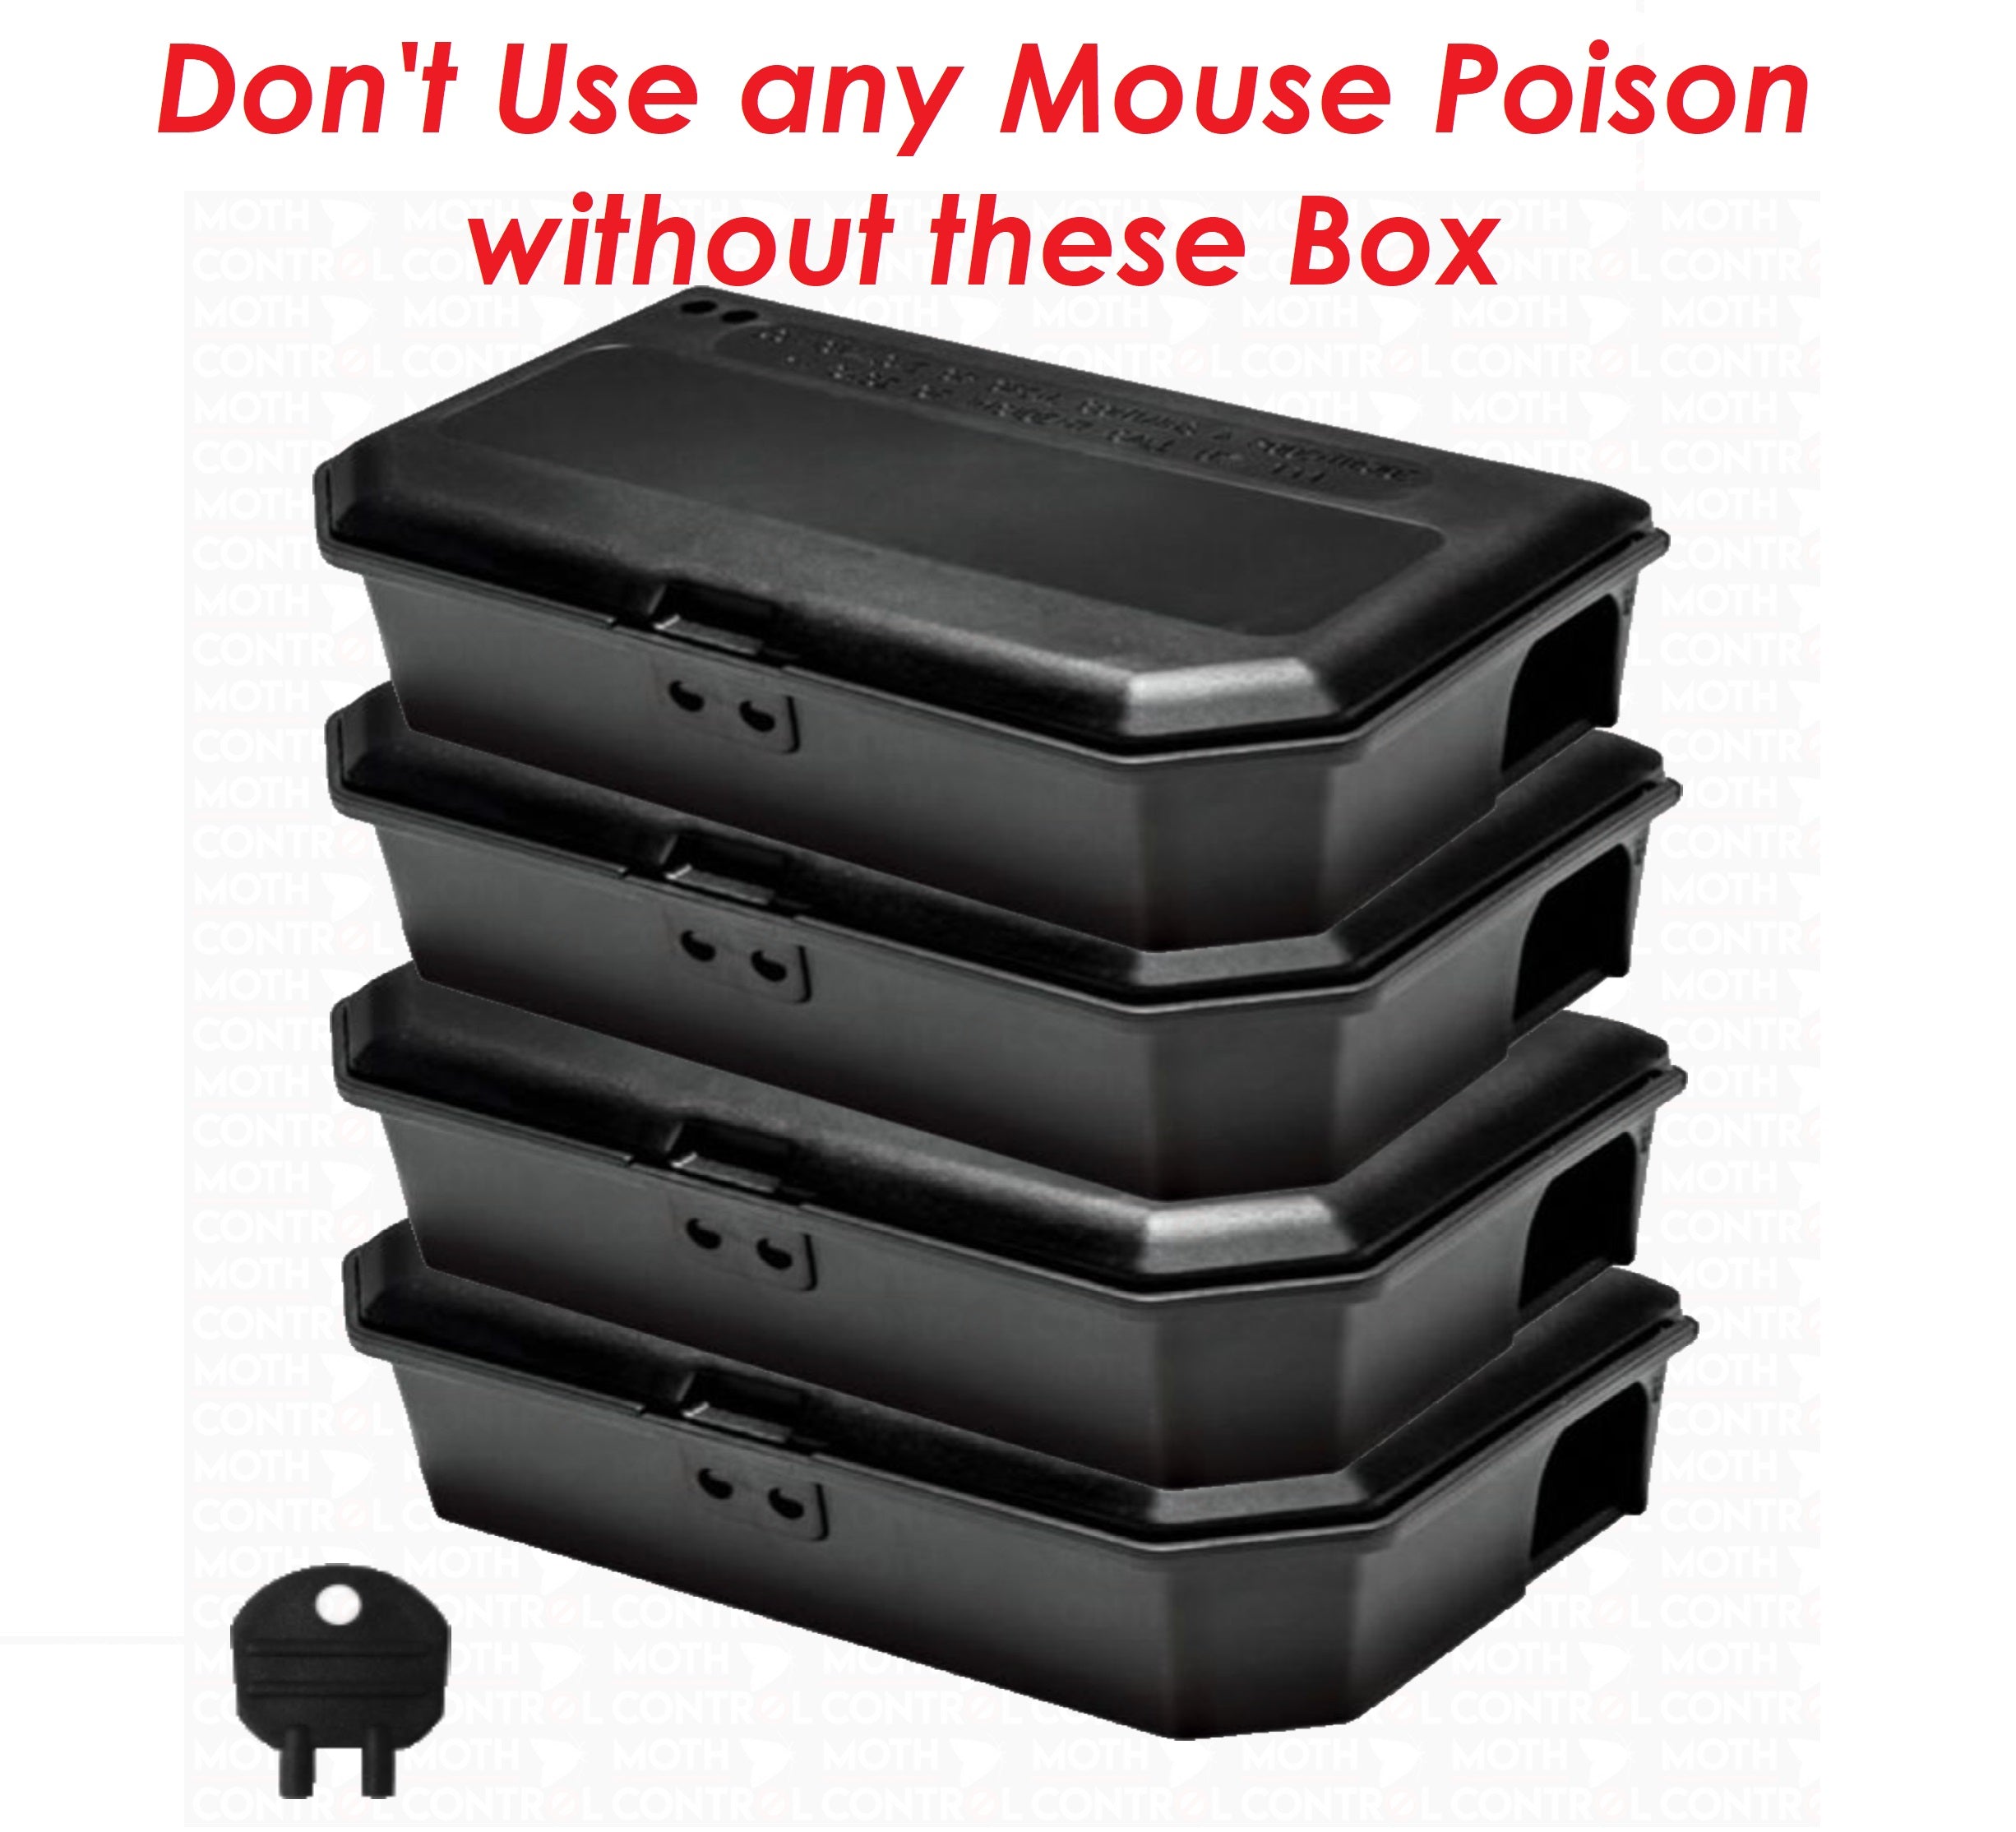 4 x Black Mouse Tamper-Resistant Bait Boxes - Holds Mice Poison Safely Away from Children & Pets (Empty - No Rodent Bait Included) - Moth Control